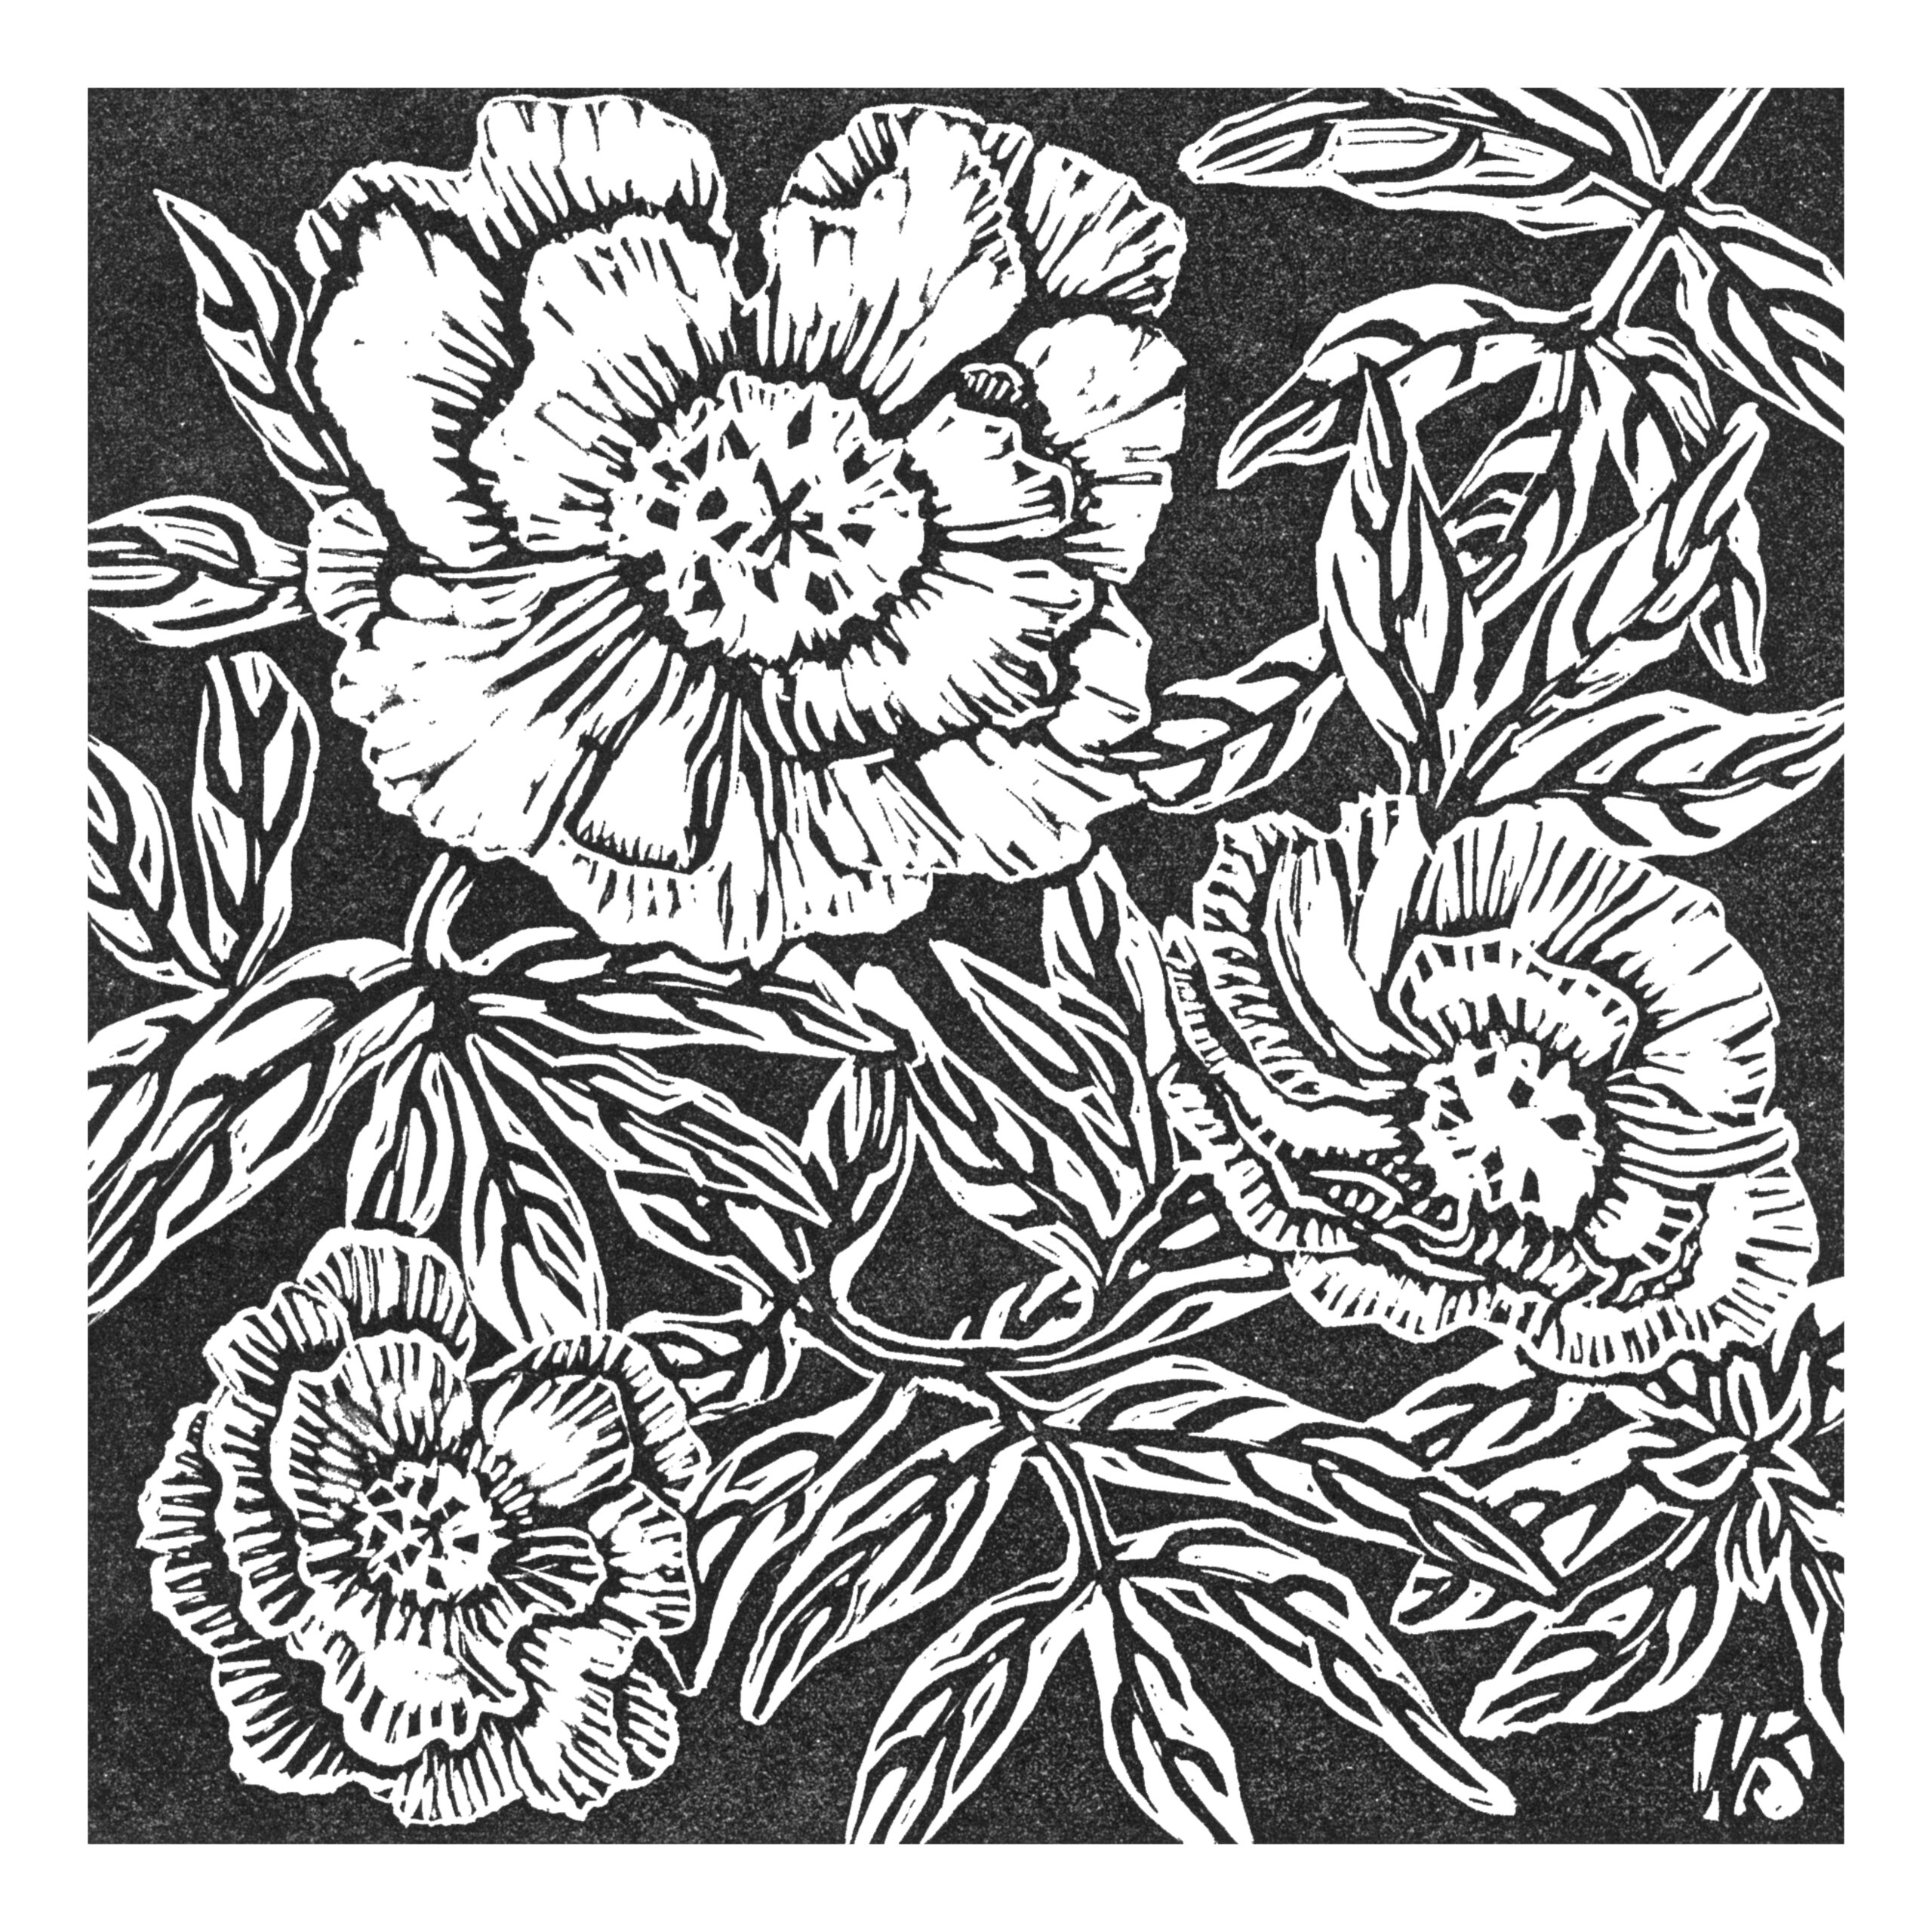 Wendy Shaft's handcarved peony image. Wendy carves her designs into linoleum and then prints the design on textiles and paper.